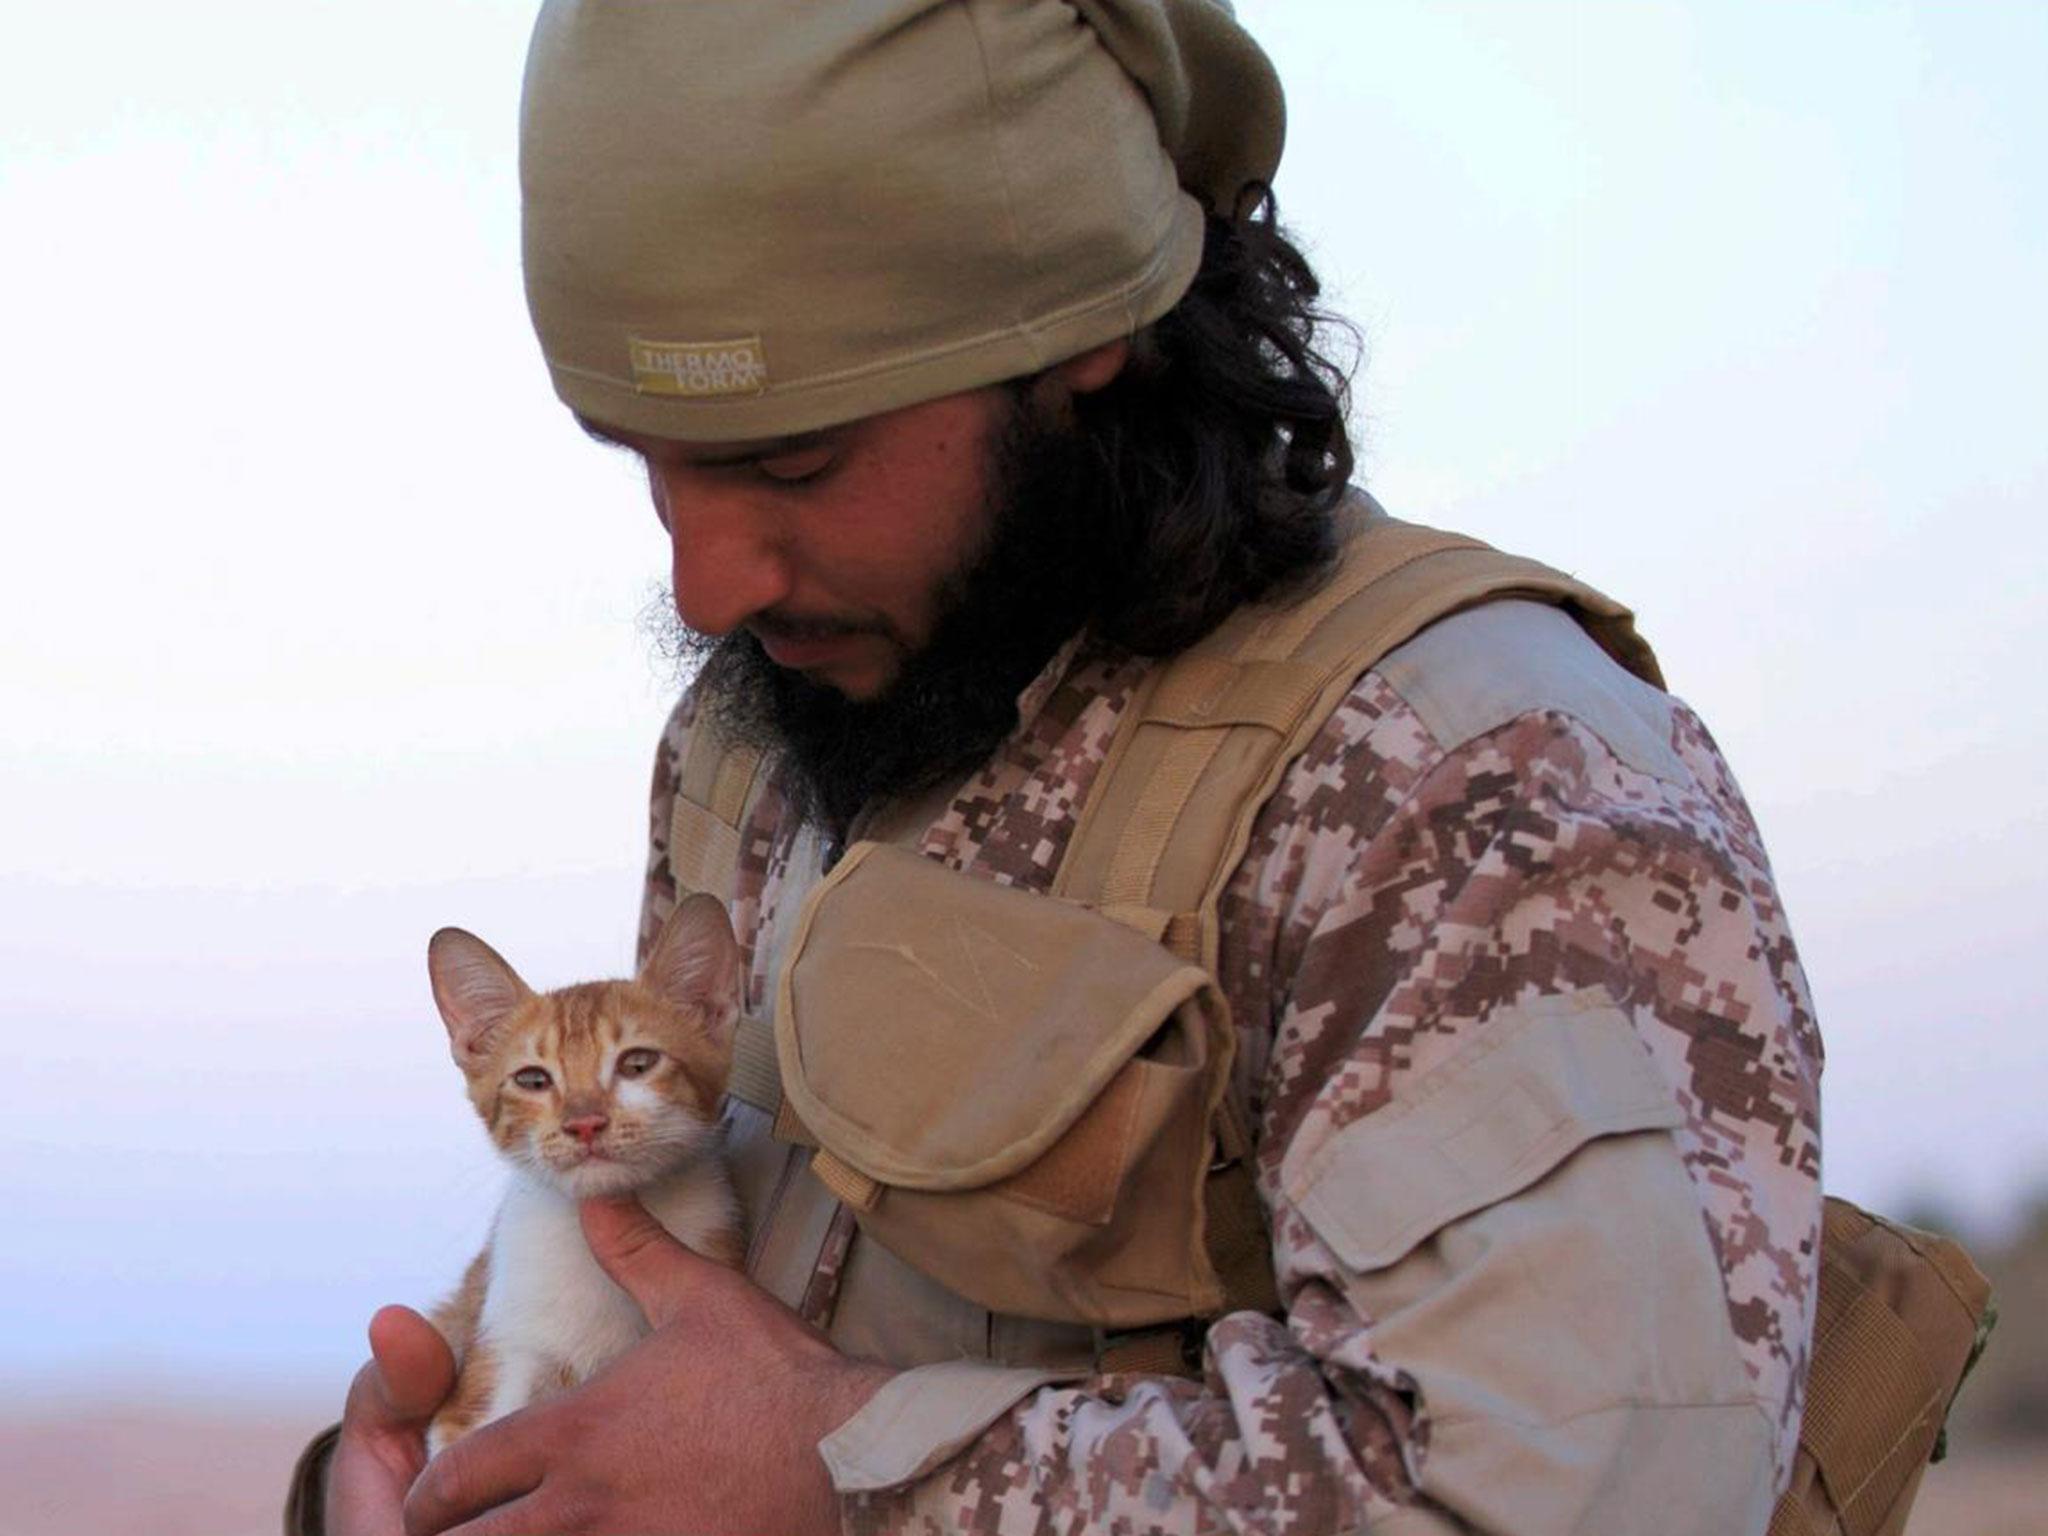 An image of a militant with a kitten from the 15th issue of Isis' Dabiq propaganda magazine